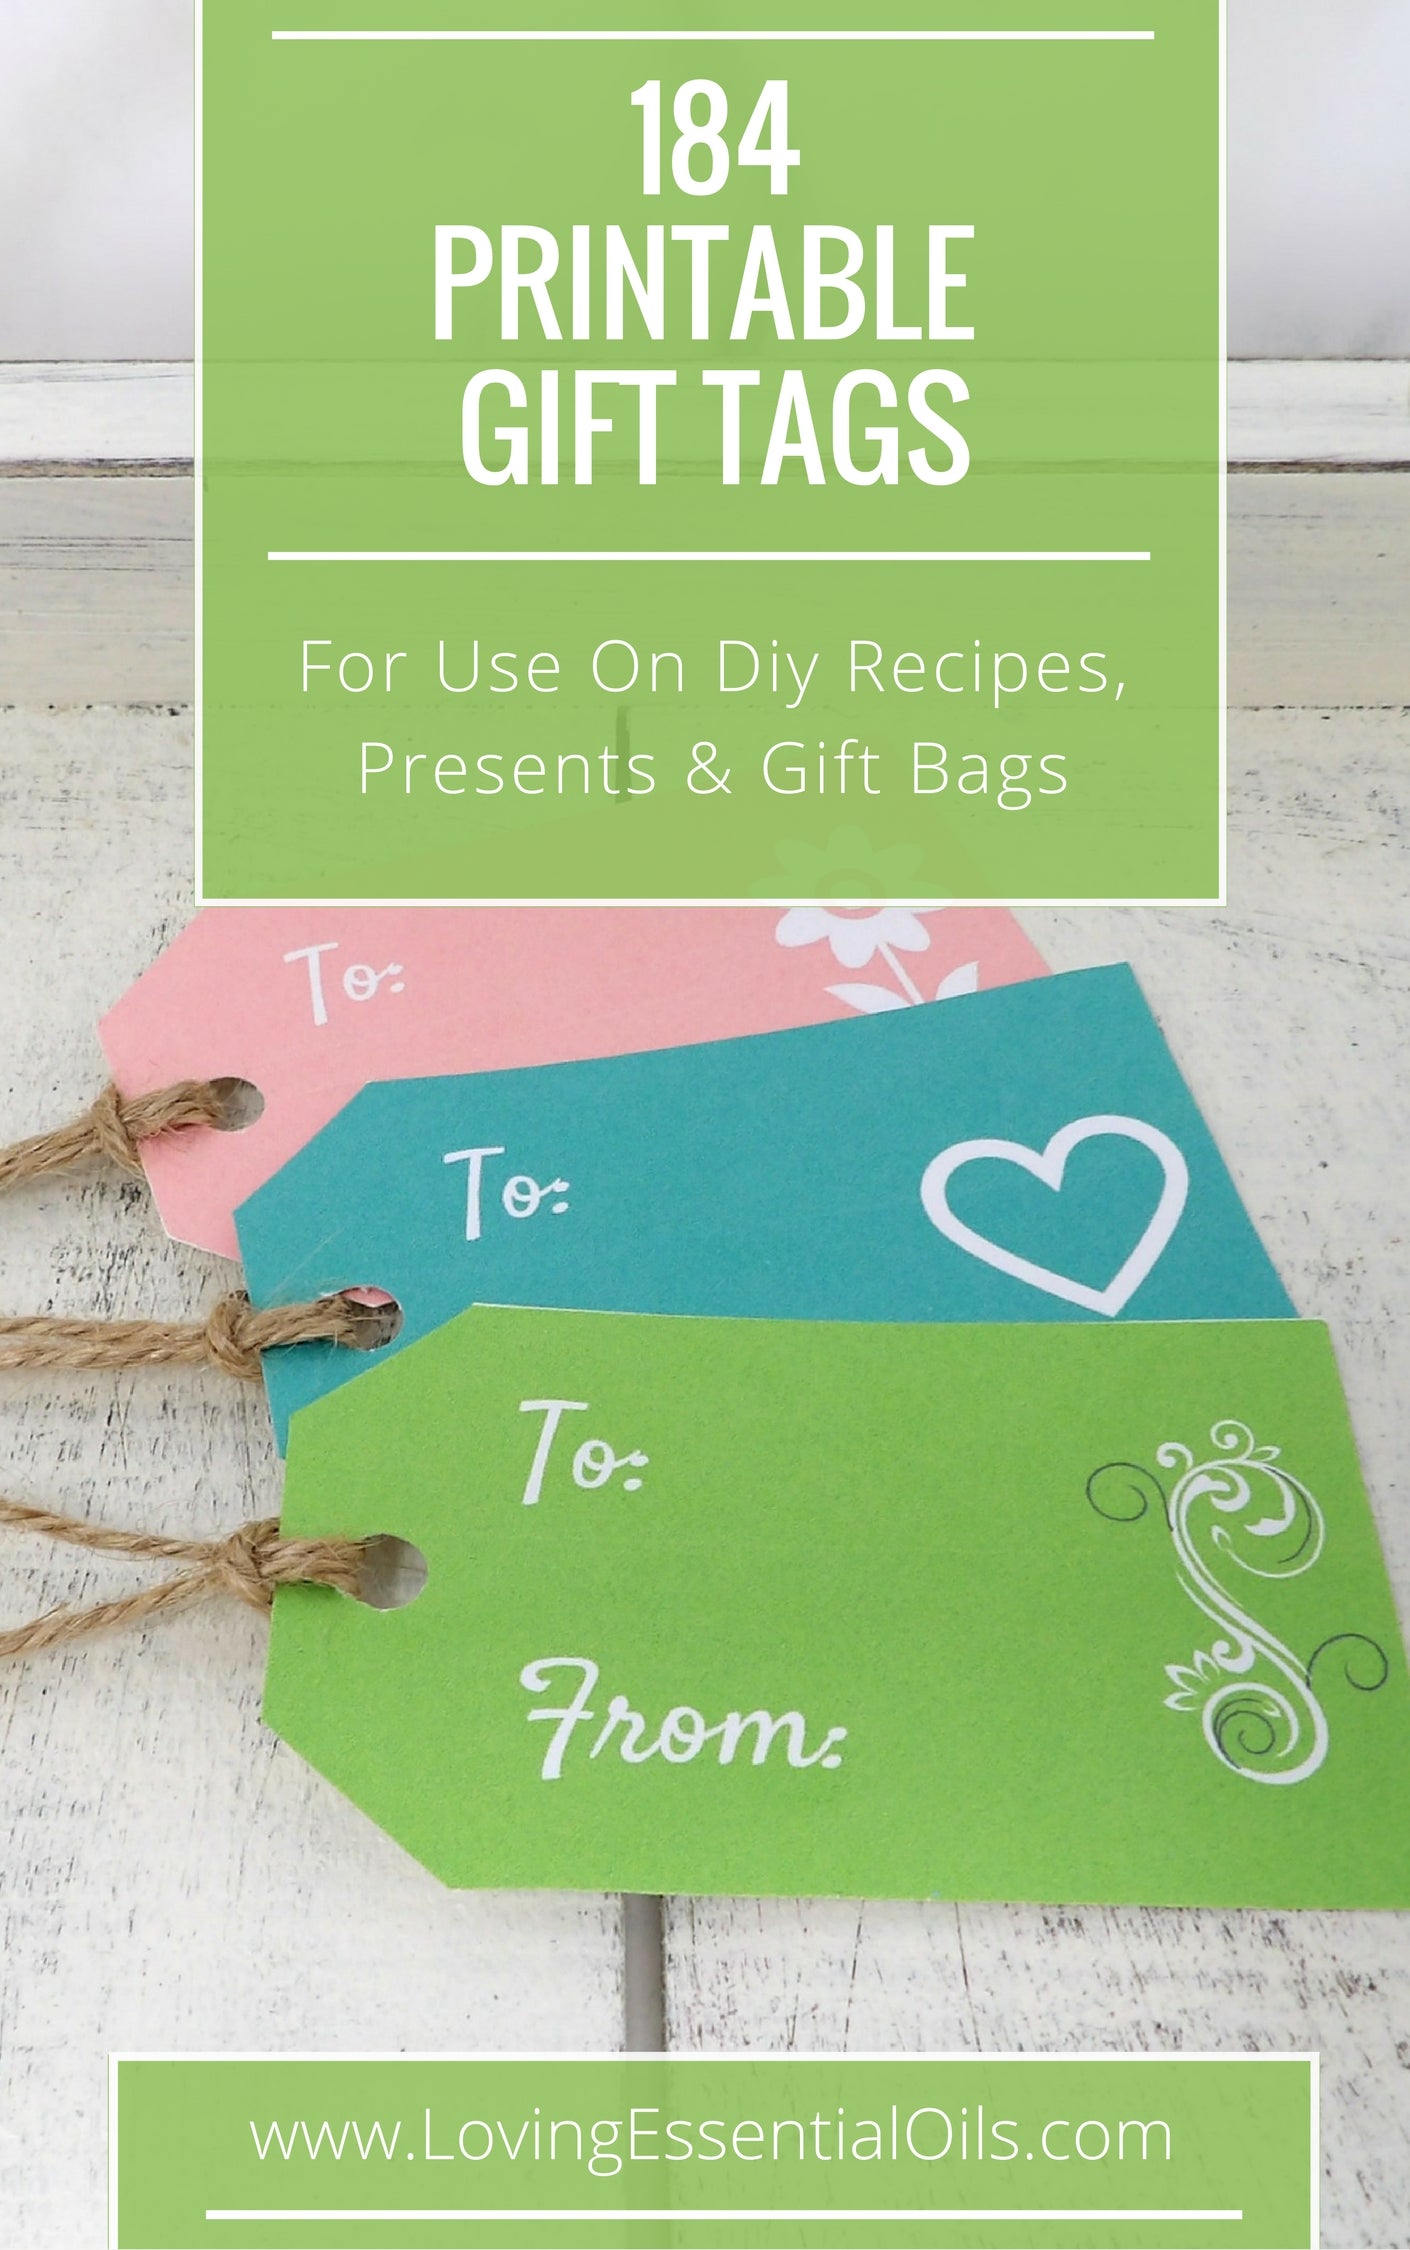 184 Free Printable Blank Gift Tags For DIY Recipes, Presents & Gift Bags